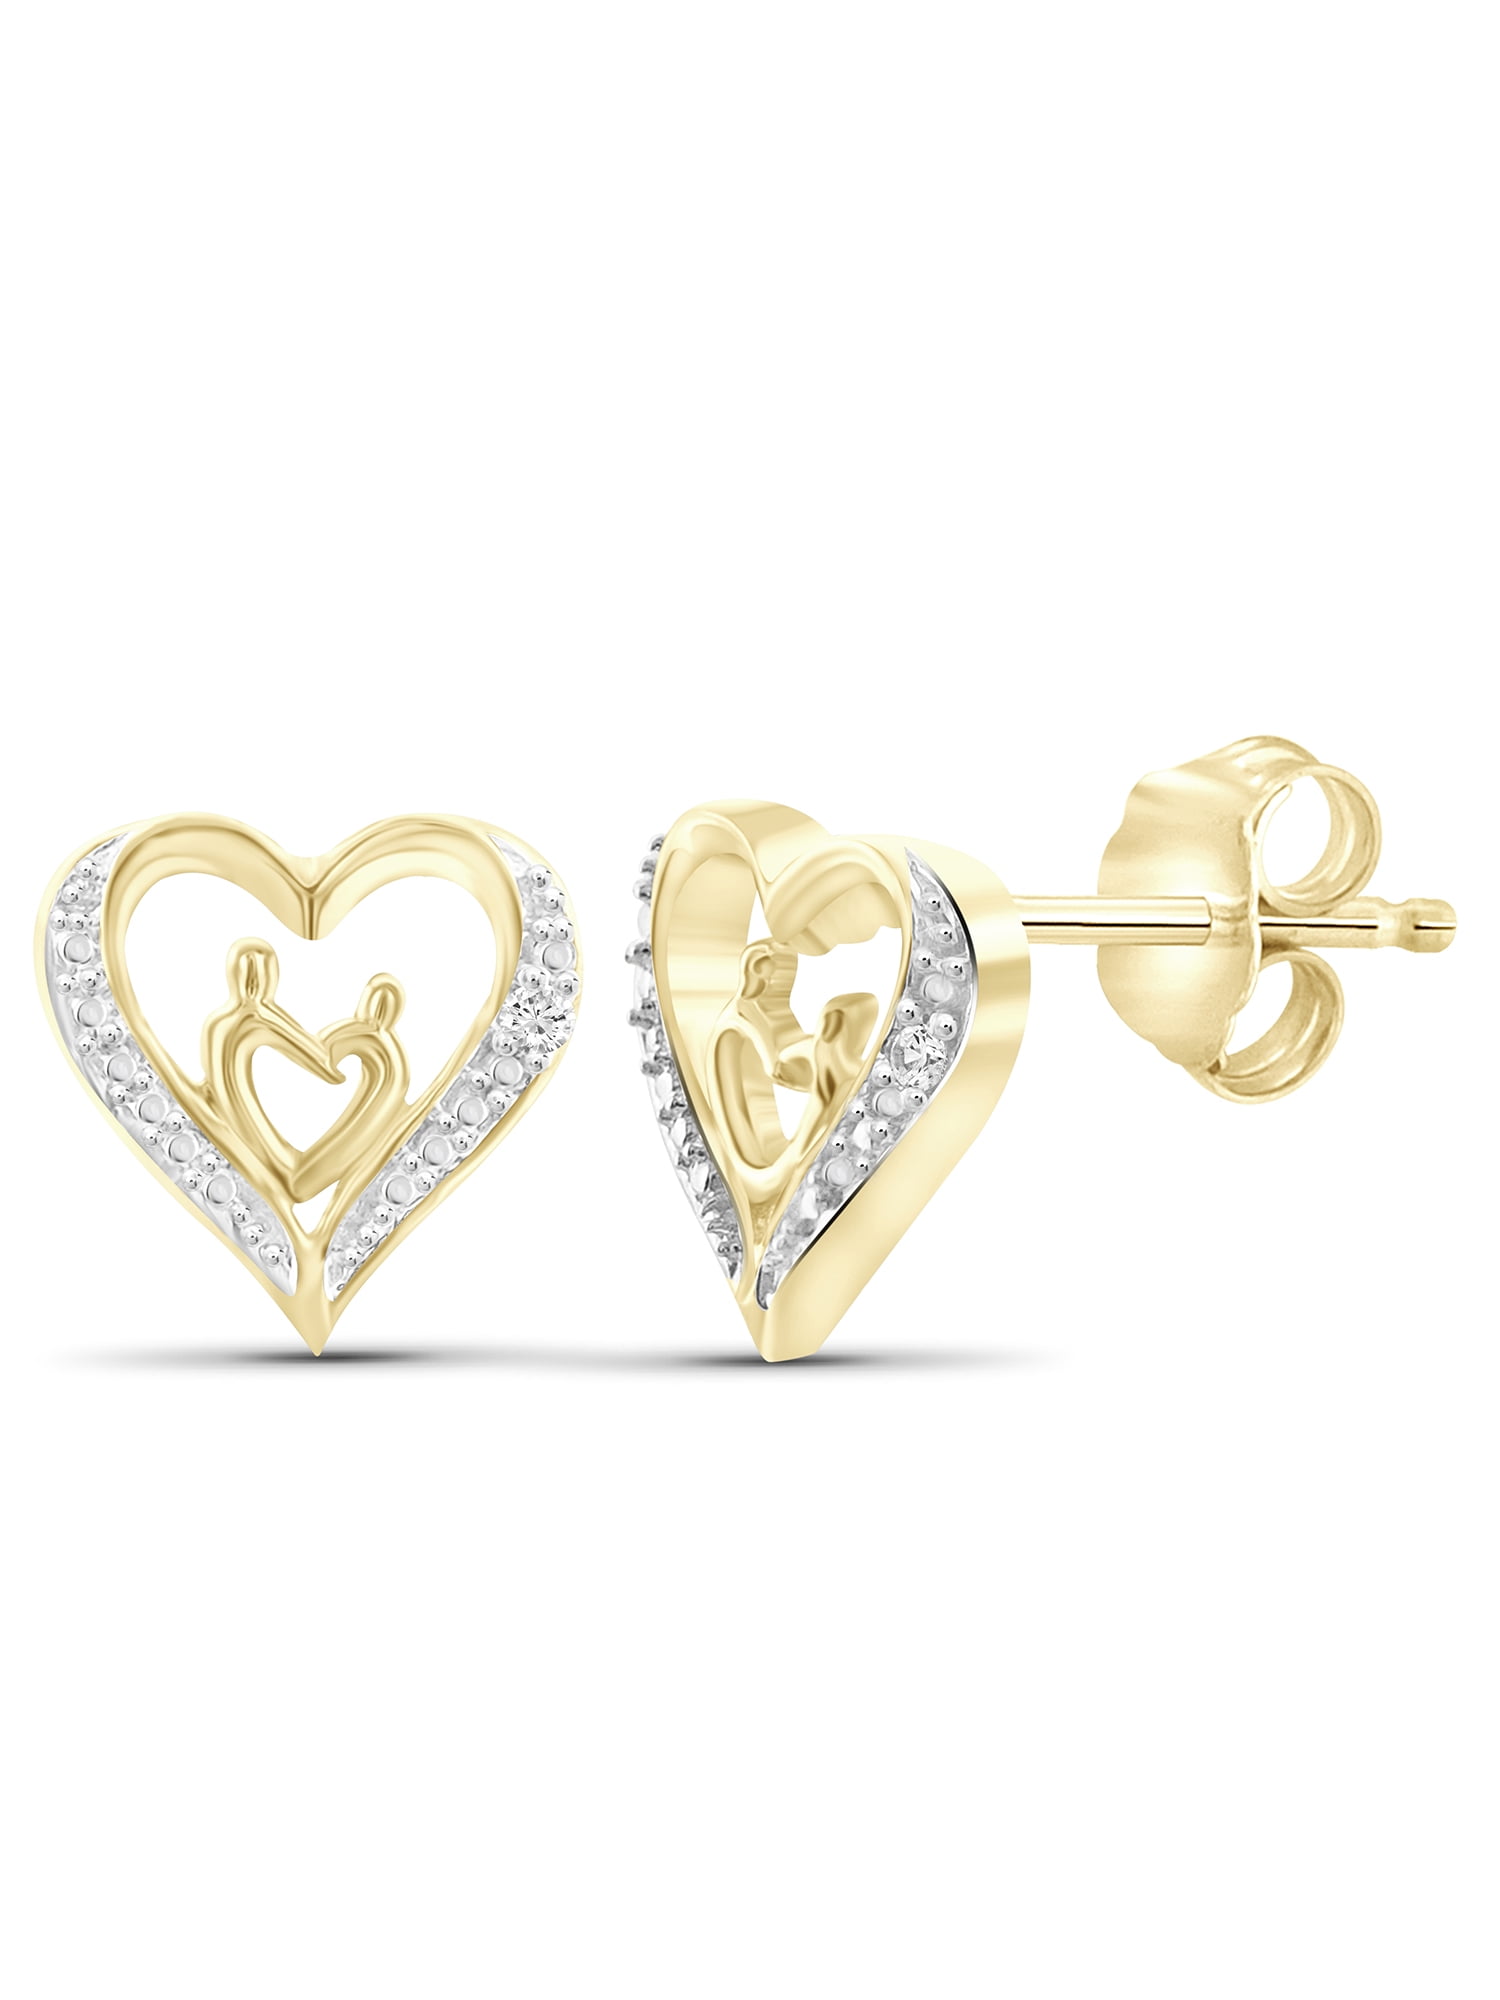 Round Cut White Cubic Zirconia Heart Shape Stud Earring in 14k Gold Over Sterling Silver